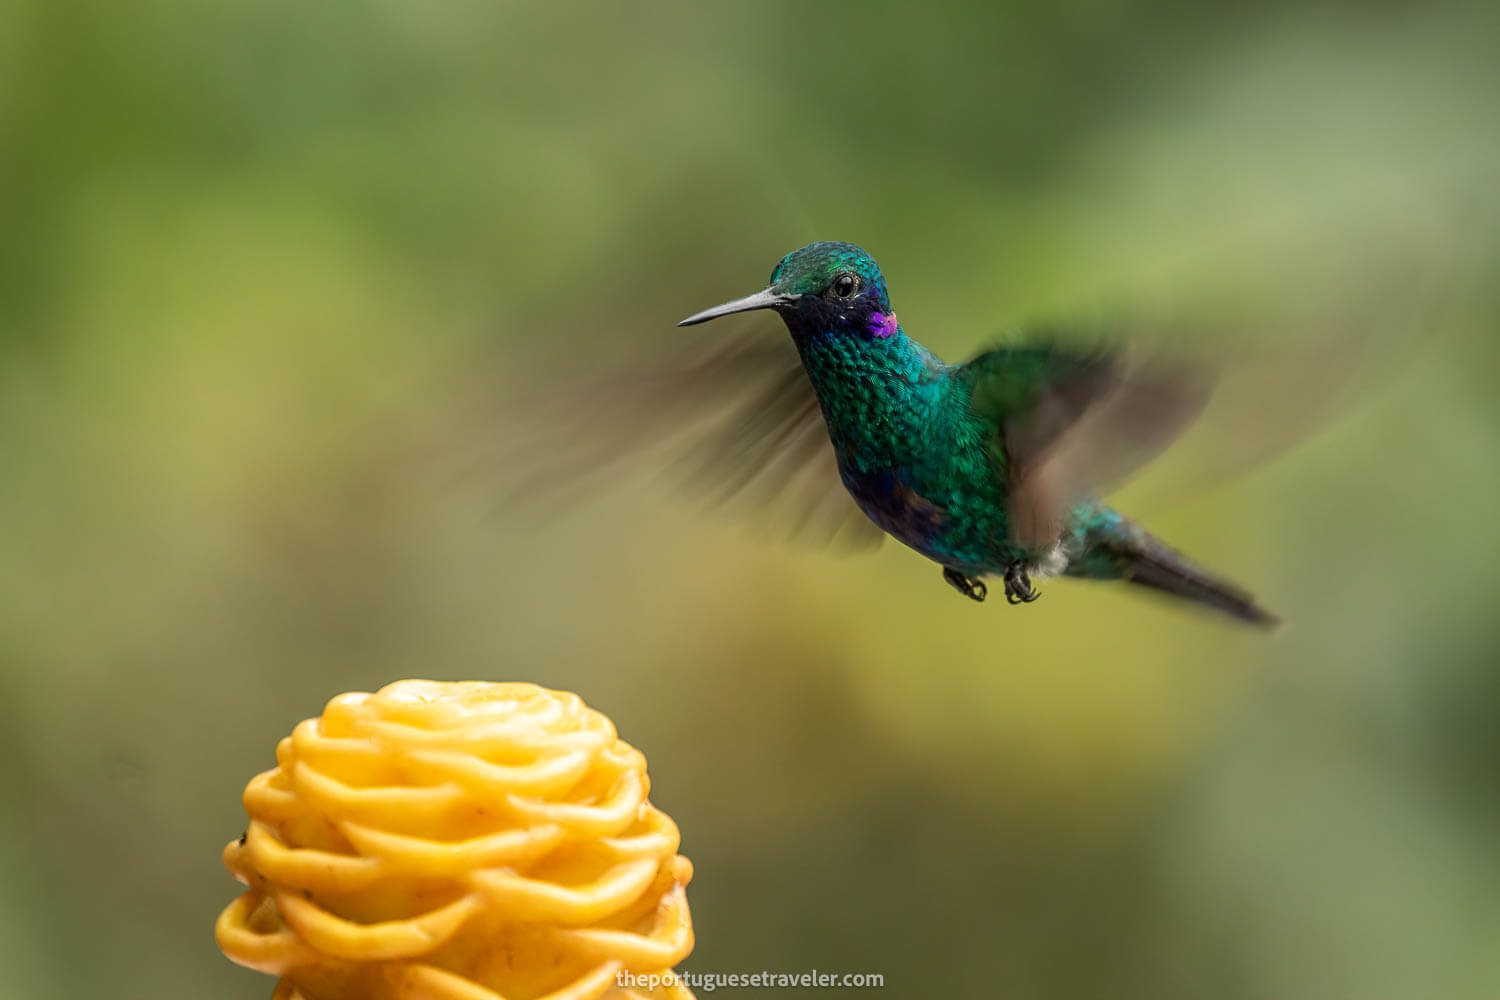 A Sparkling Violetear Hummingbird on the Birdwatching Tour in Mindo